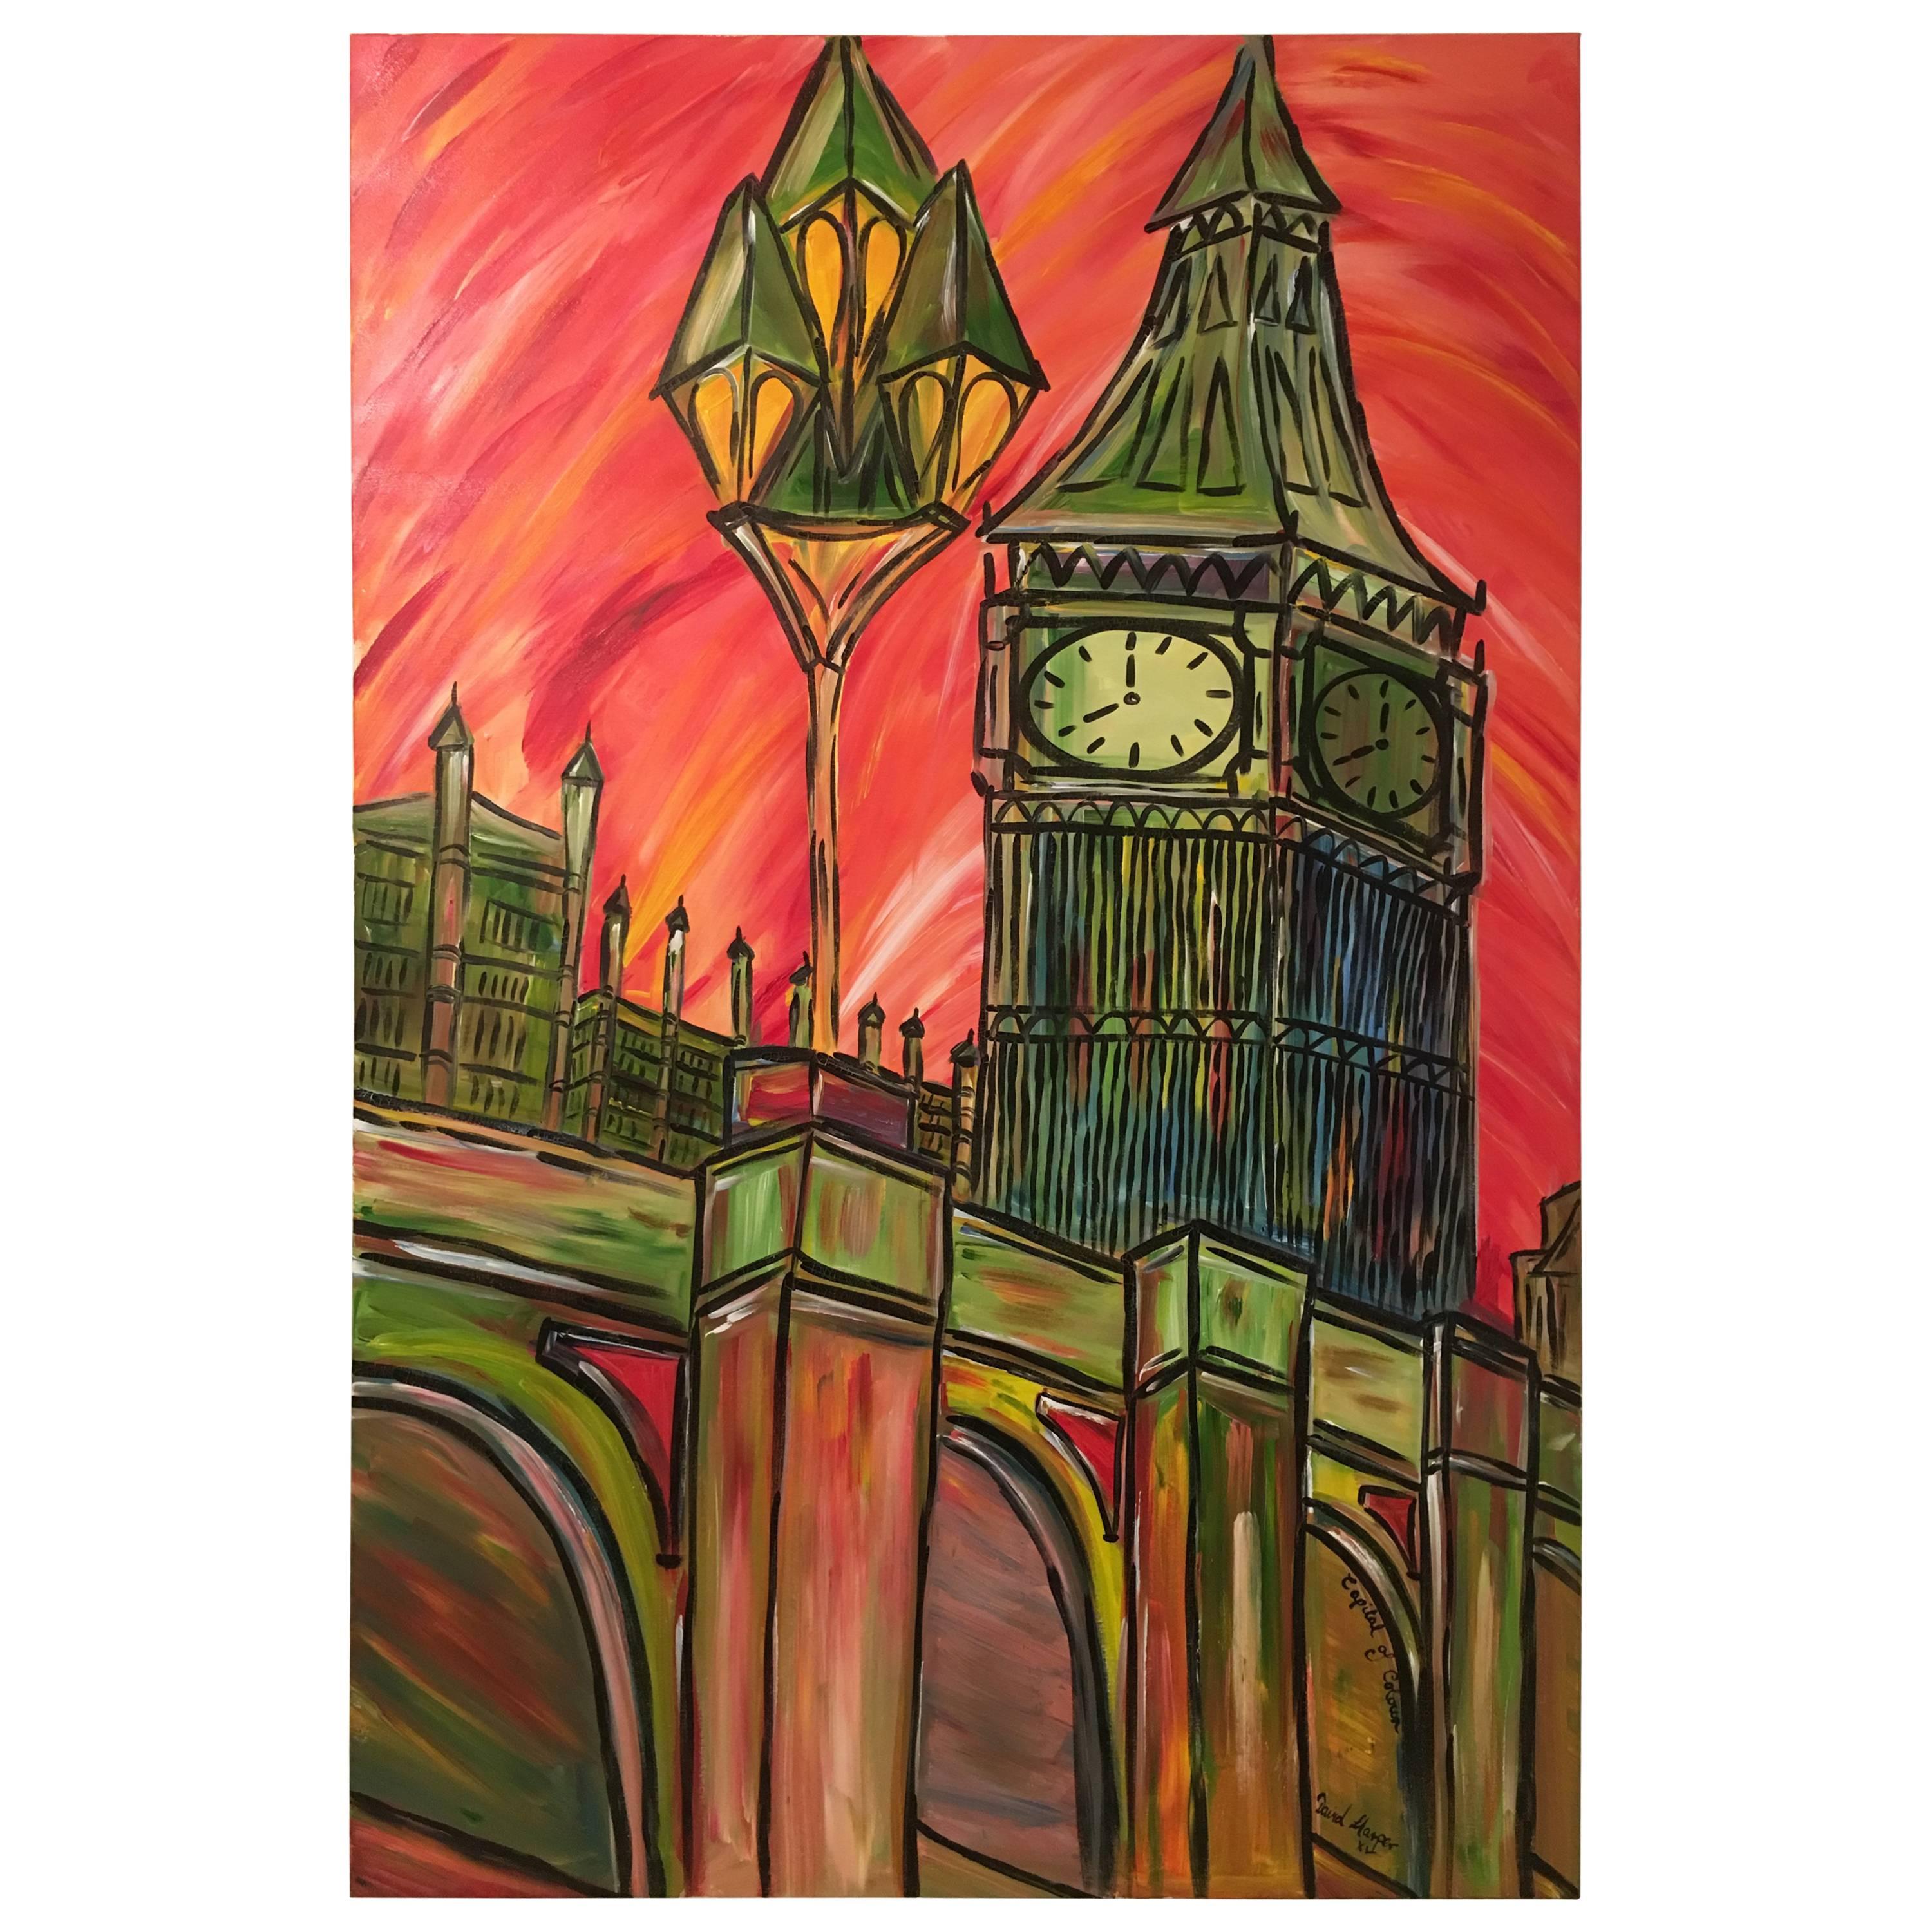 David Harper, London Capital Of Colour 'In Red' Large Original On Canvas For Sale